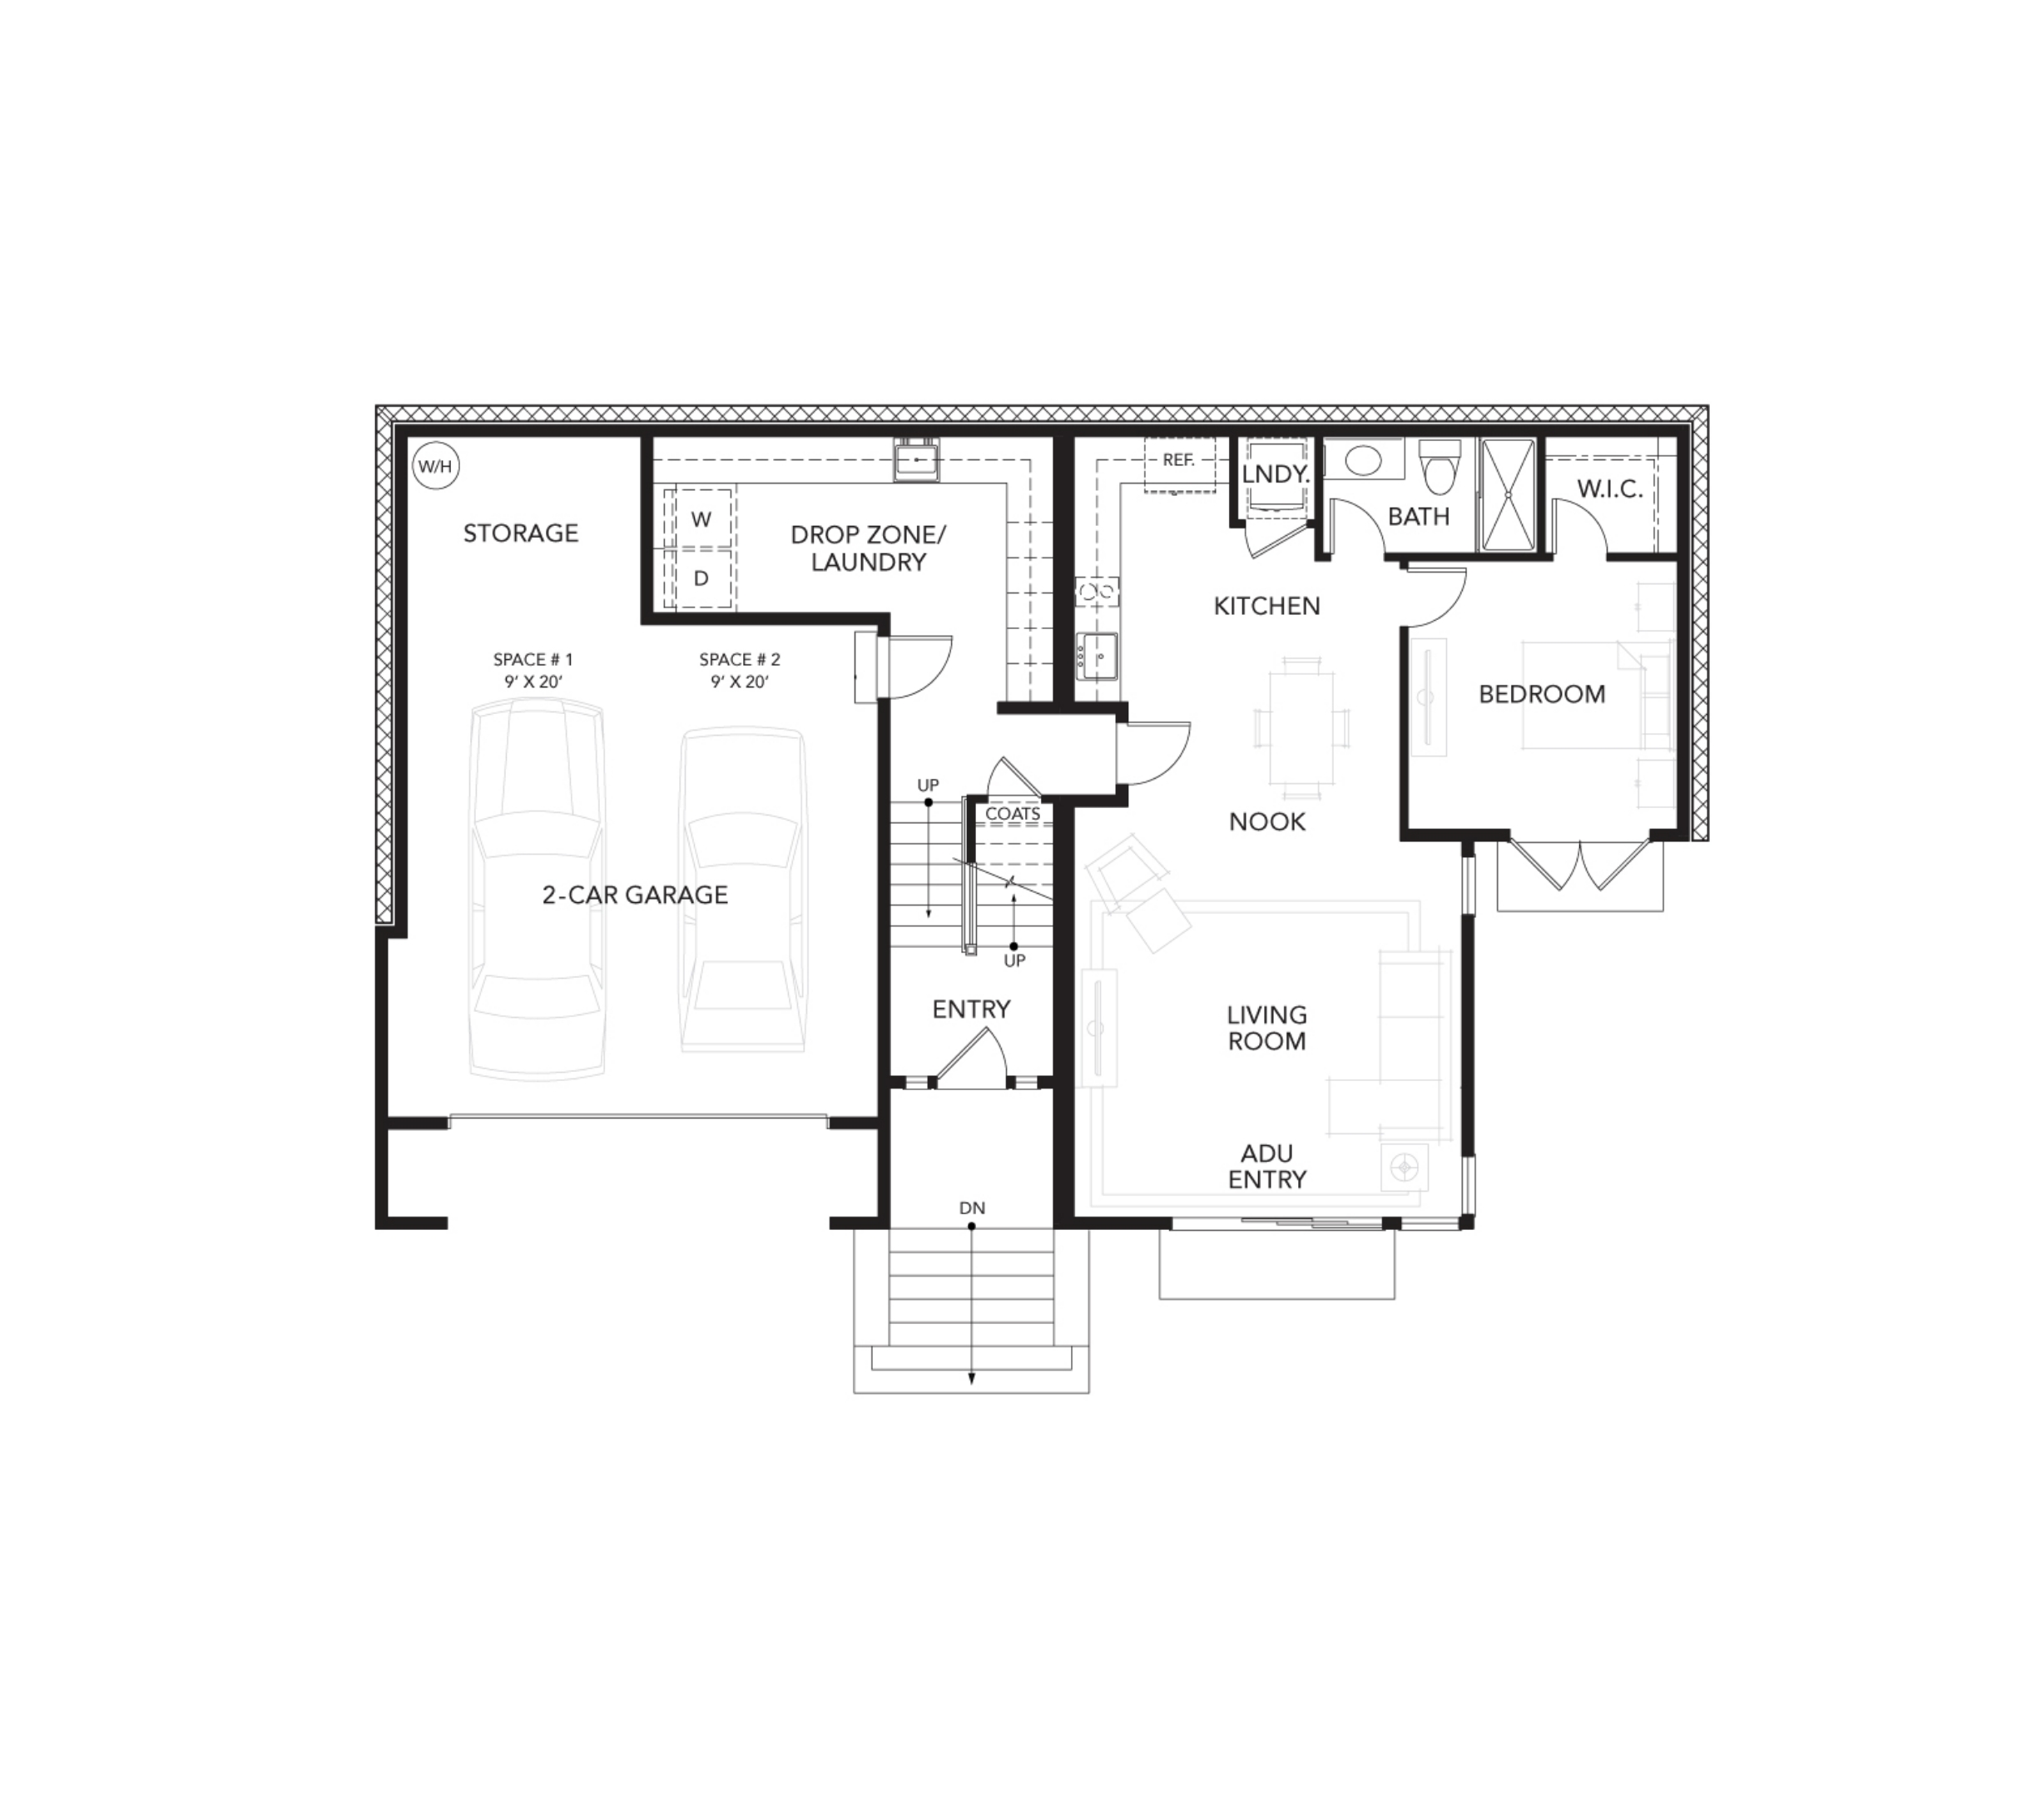 Haven Development's first floor Plan for elevation 3A of the Legacy at Lucas Valley new home development in Marin County, CA